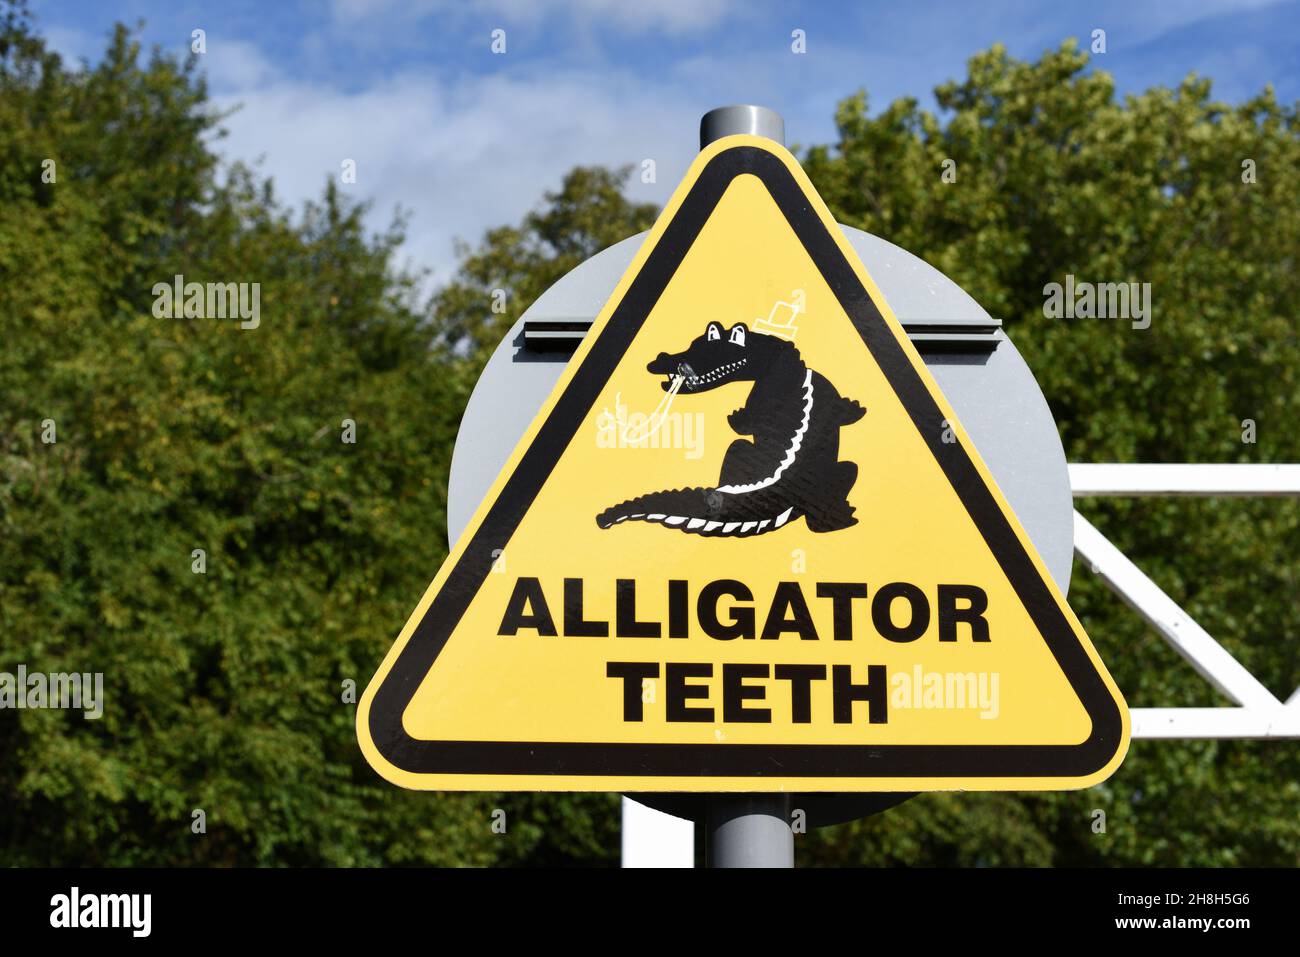 Sign for Alligator Teeth Traffic Control System or Traffic Direction Enforcers at Entrance or Exit to Car Park Stock Photo